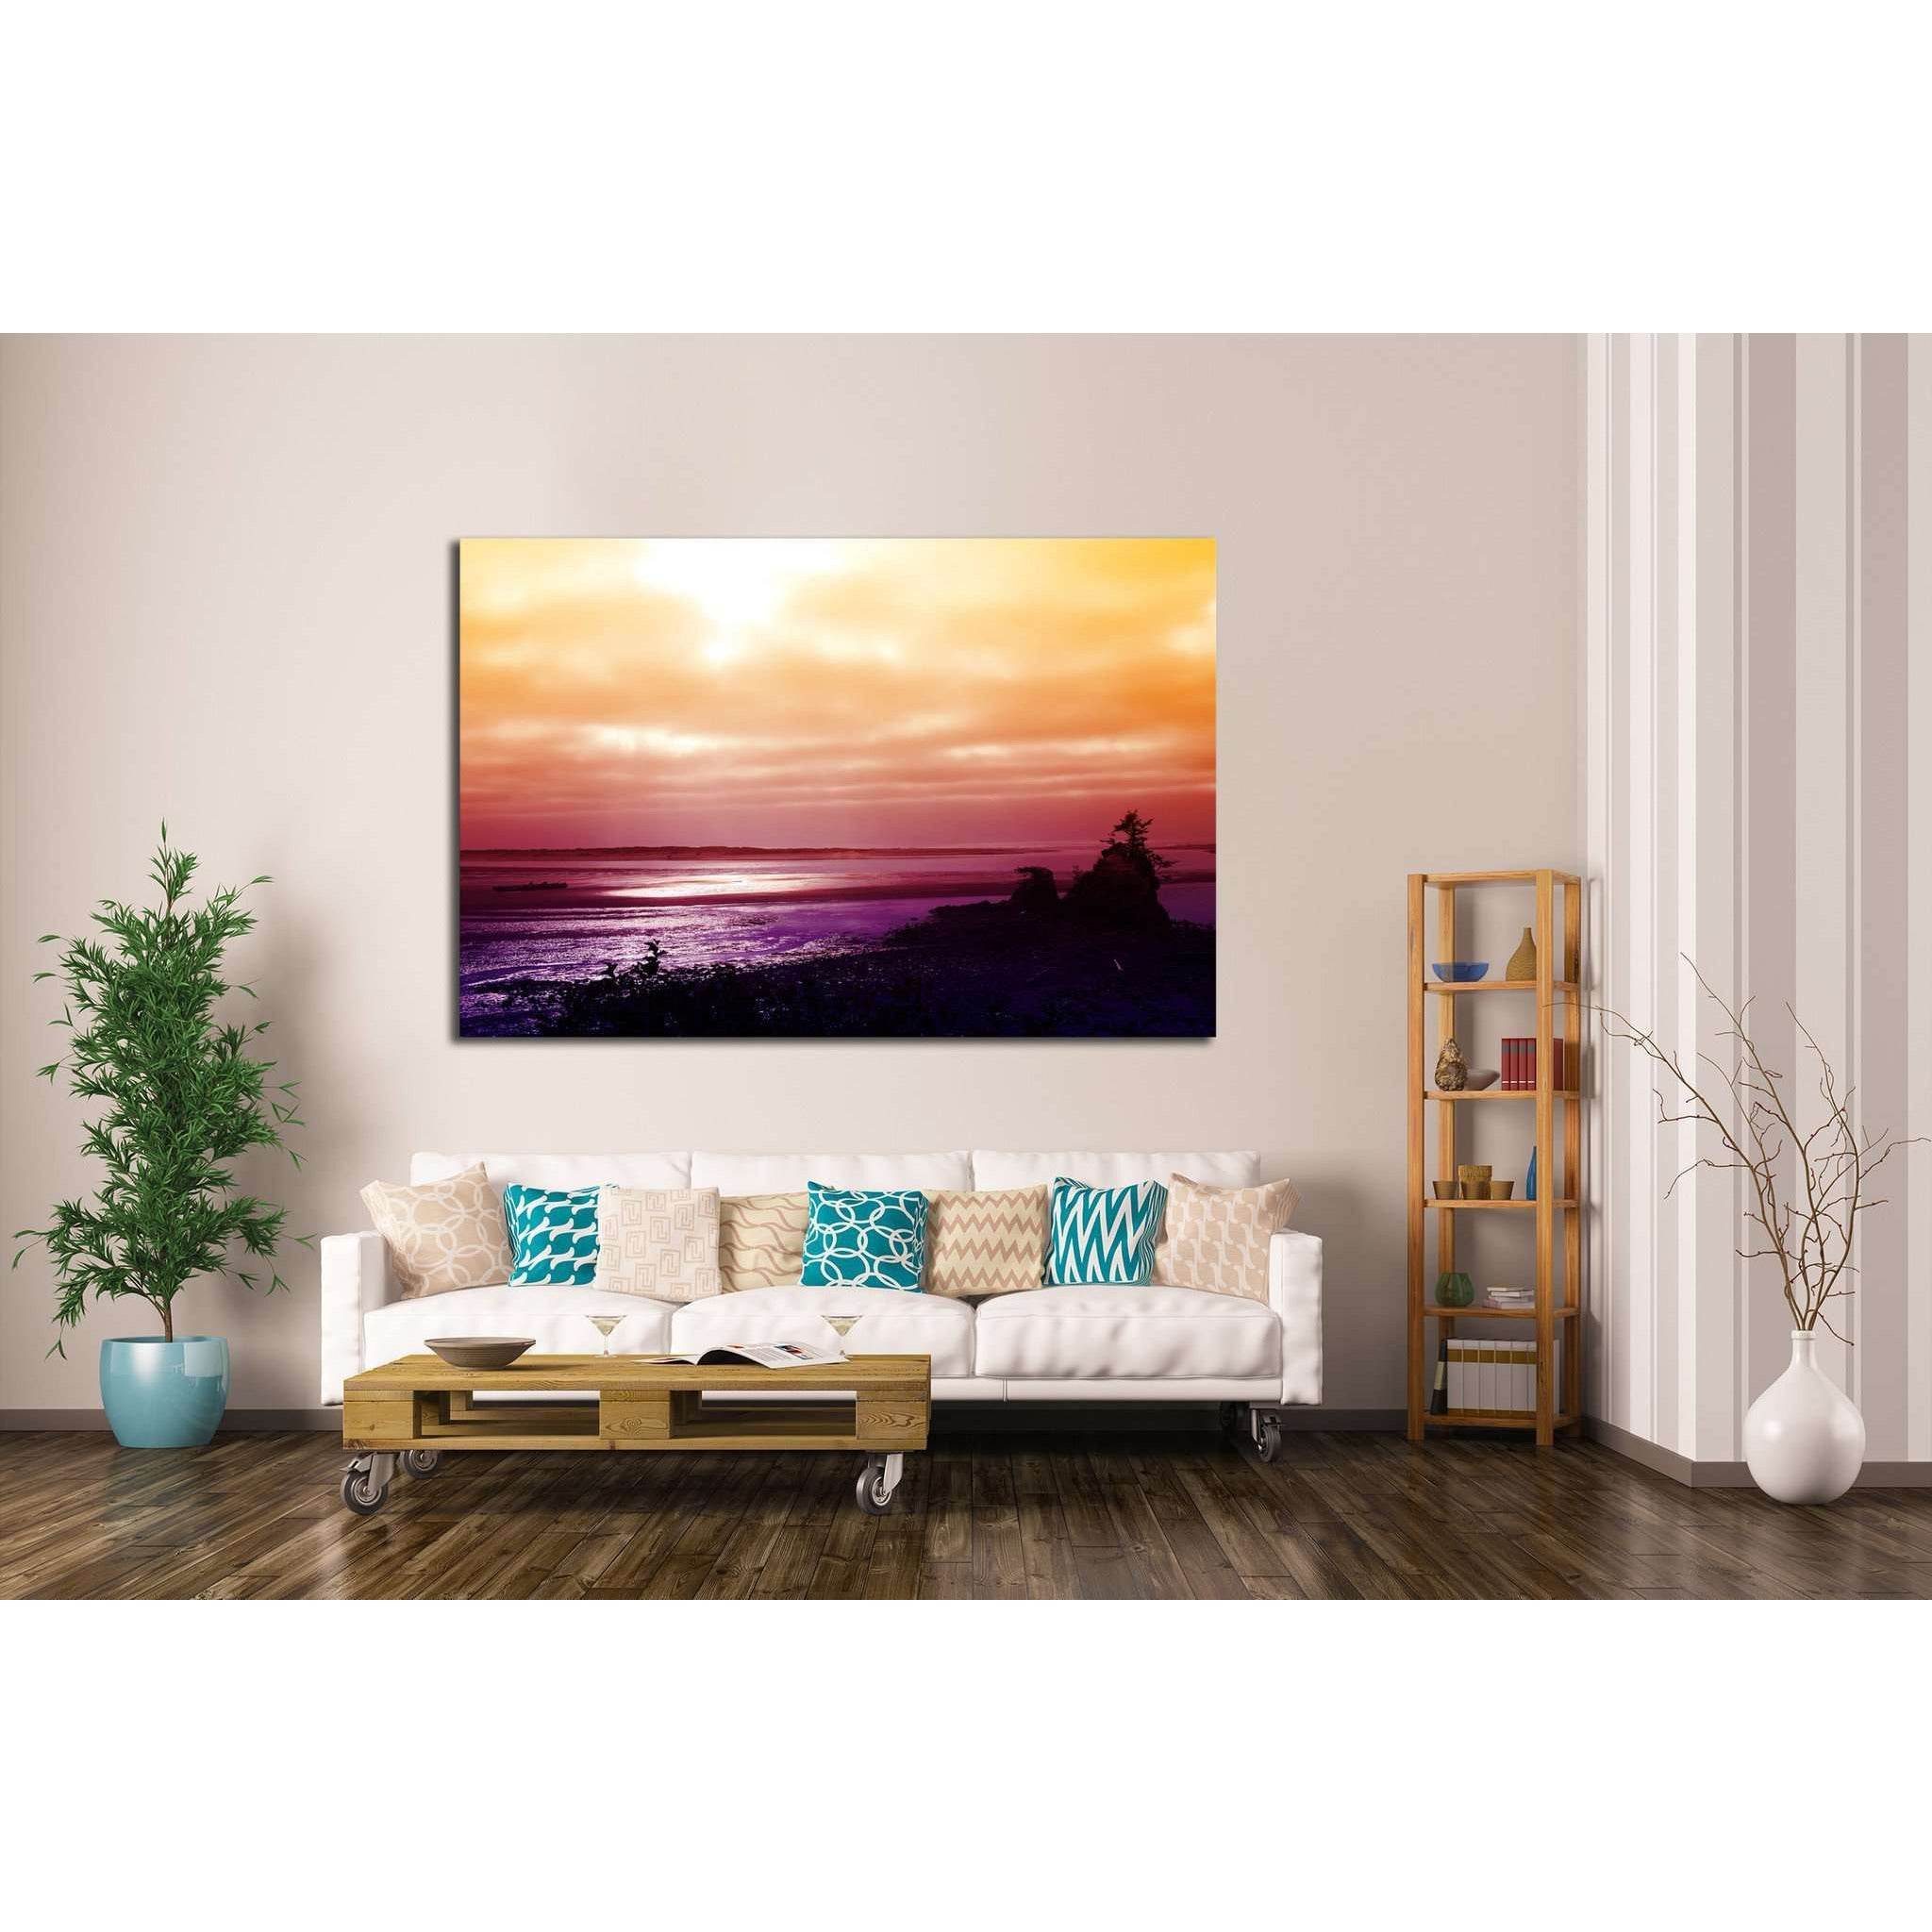 Sunset over the Pacific Coast near Lincoln City, Oregon №1957 Ready to Hang Canvas Print